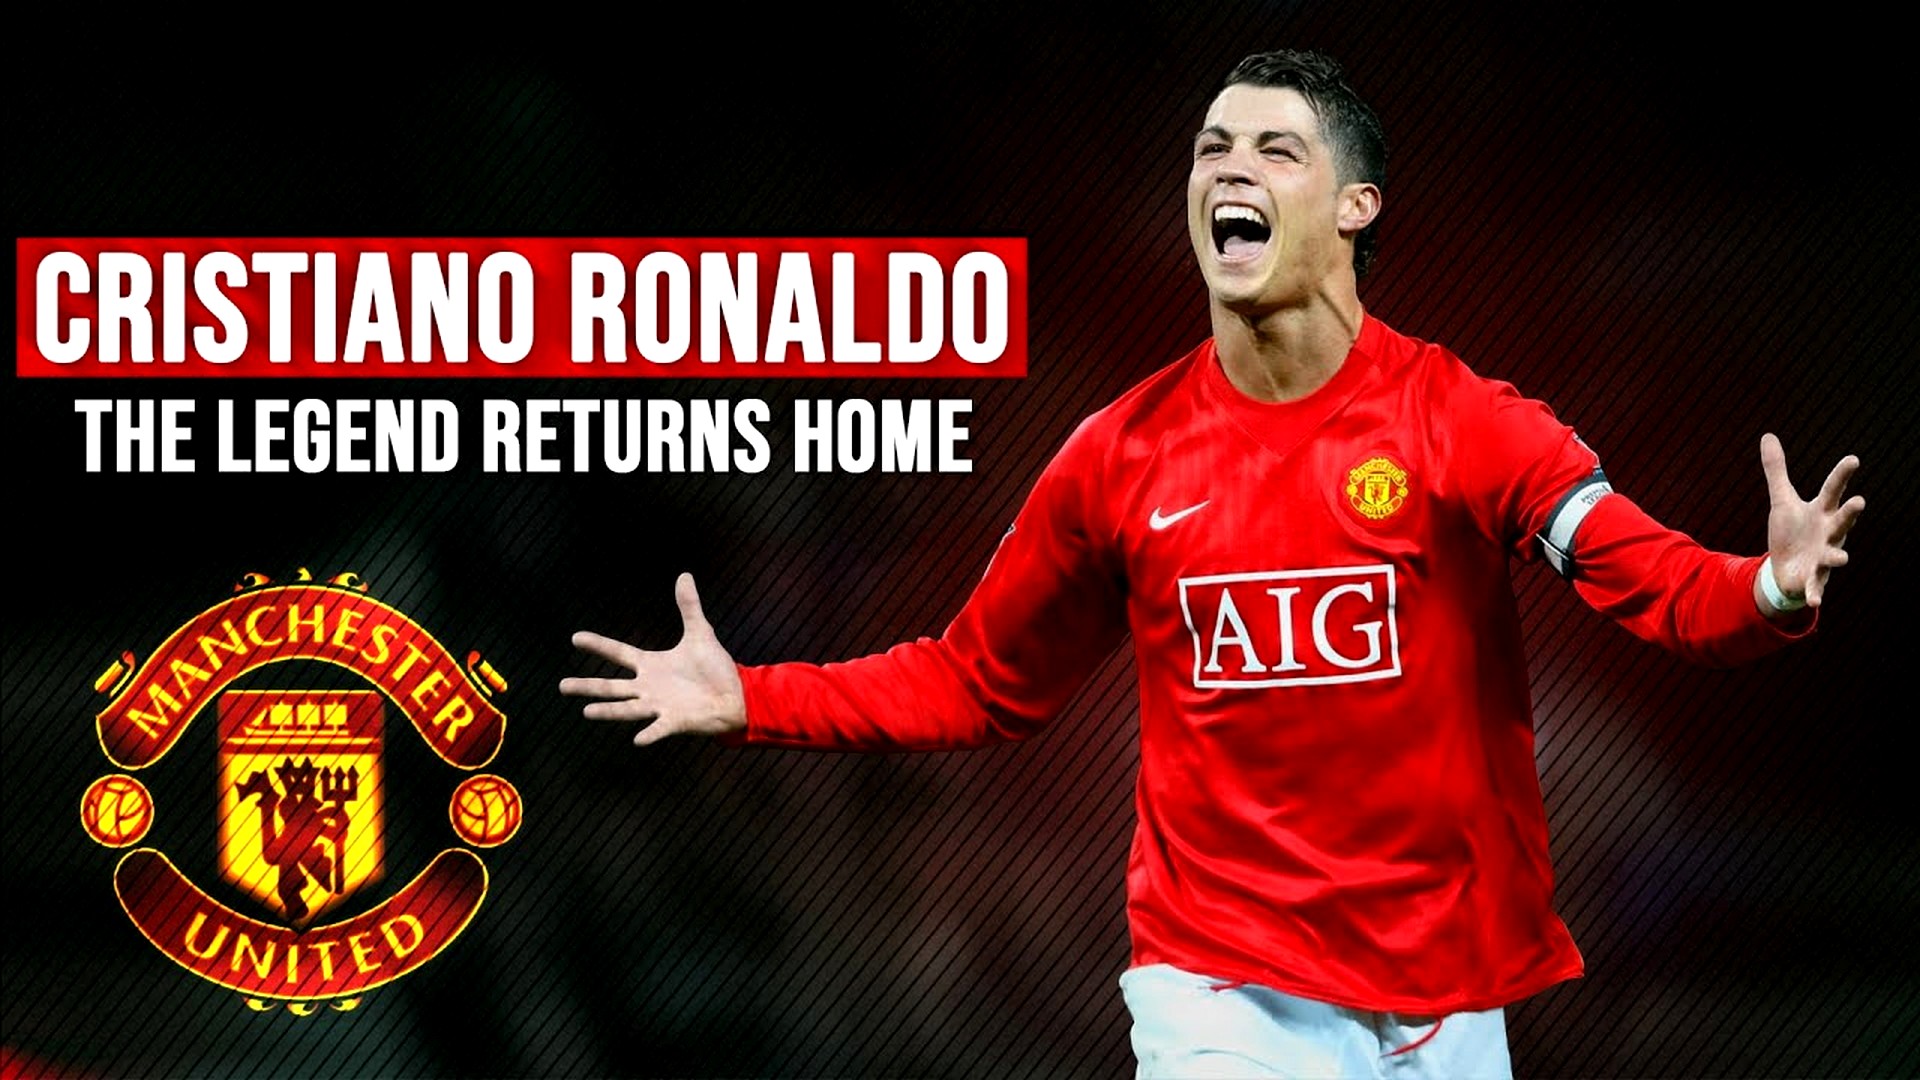 Cristiano Ronaldo Manchester United Desktop Wallpapers With high-resolution 1920X1080 pixel. You can use this wallpaper for your Desktop Computers, Mac Screensavers, Windows Backgrounds, iPhone Wallpapers, Tablet or Android Lock screen and another Mobile device